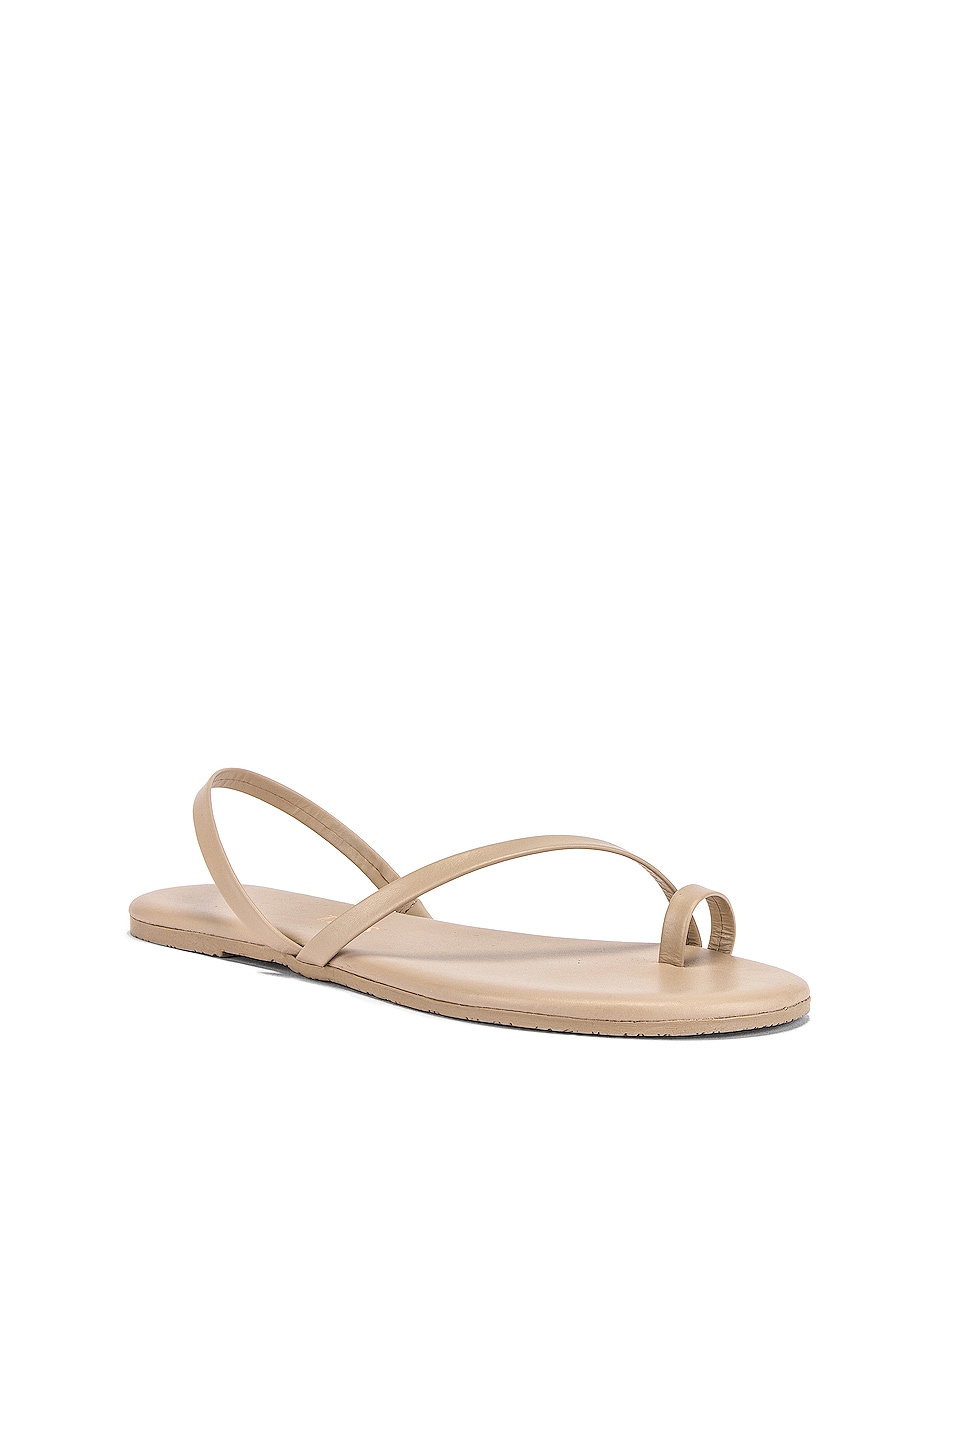 TKEES LC Sandal in Taupe | REVOLVE